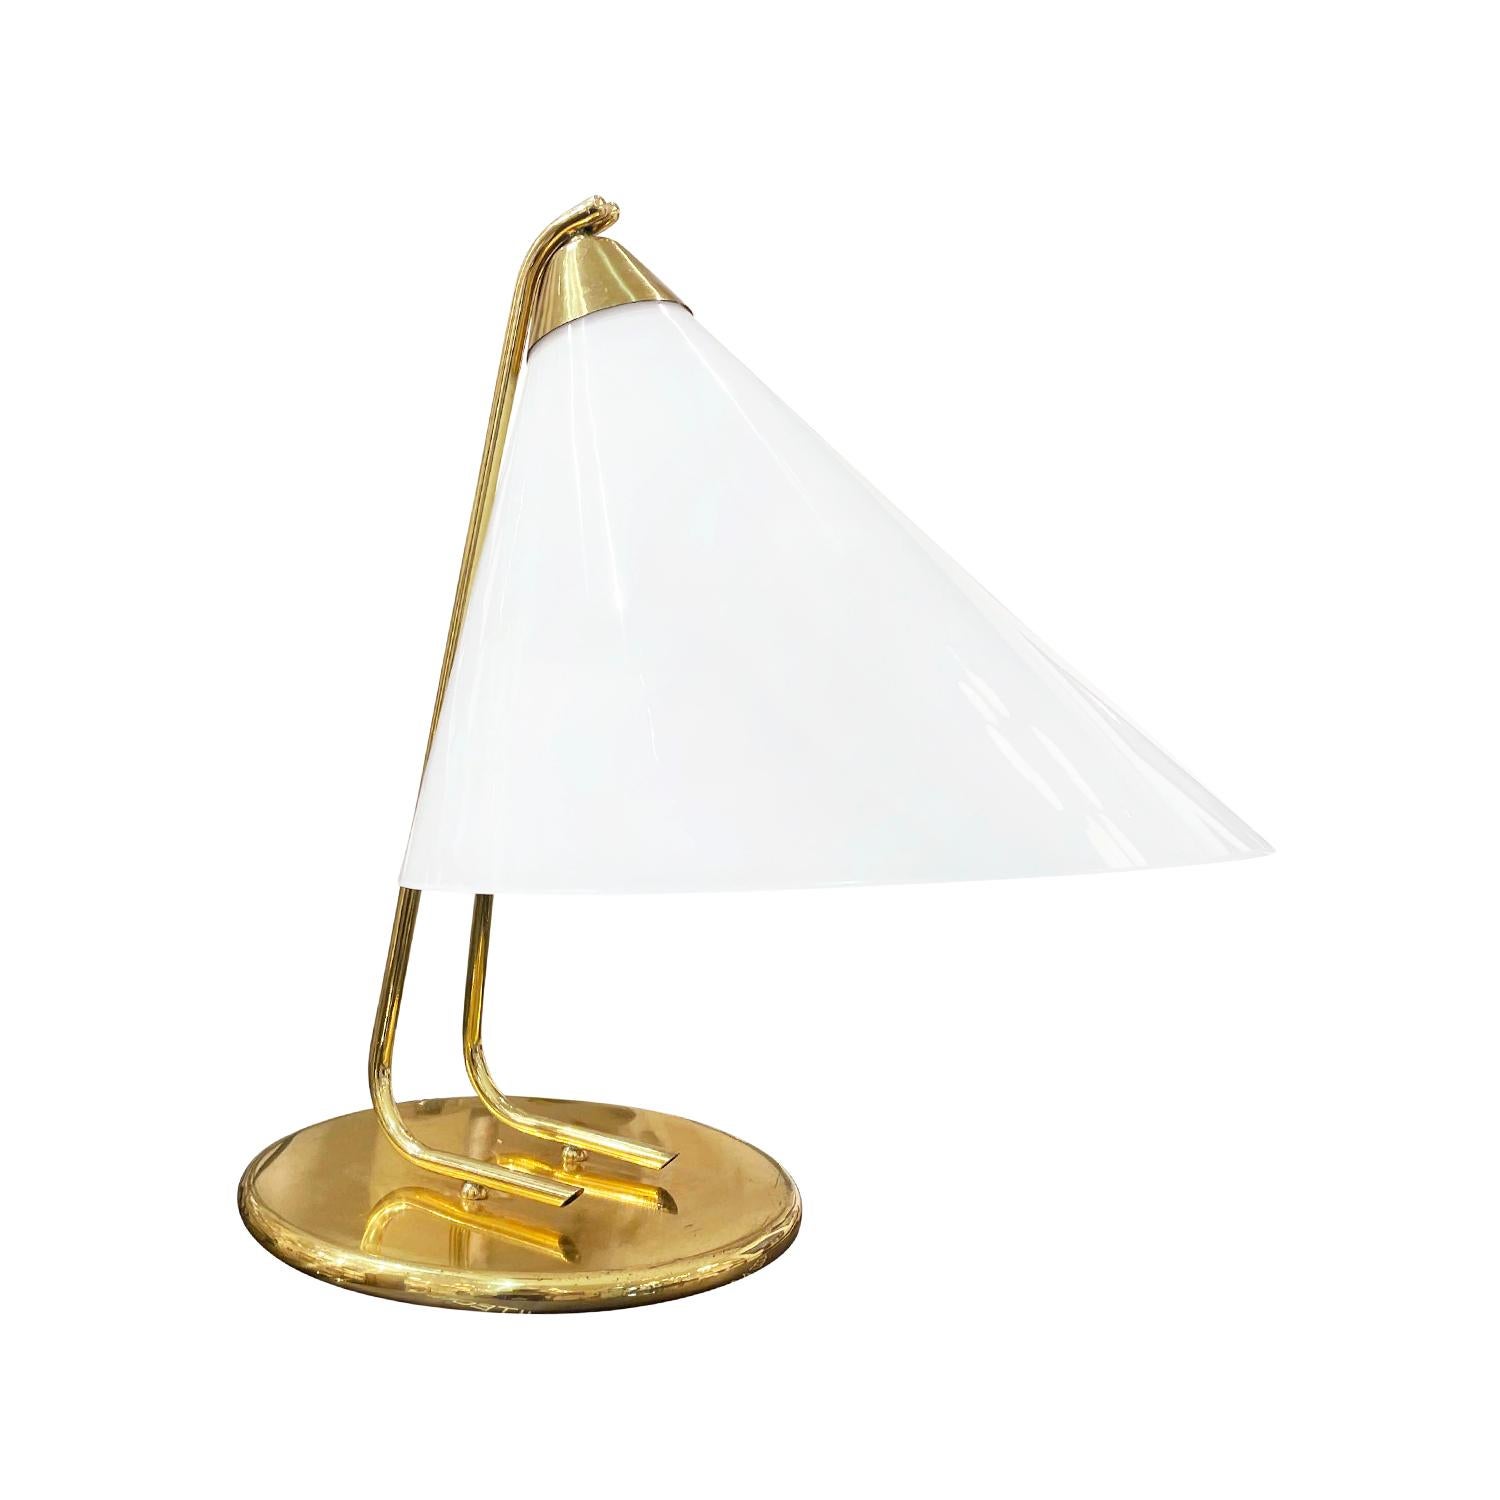 A vintage Mid-Century modern Italian table lamp made of hand crafted polished brass, designed and produced by Stilnovo in good condition. The sculptural desk light is particularized with a large white shade which is made of hand blown frosted